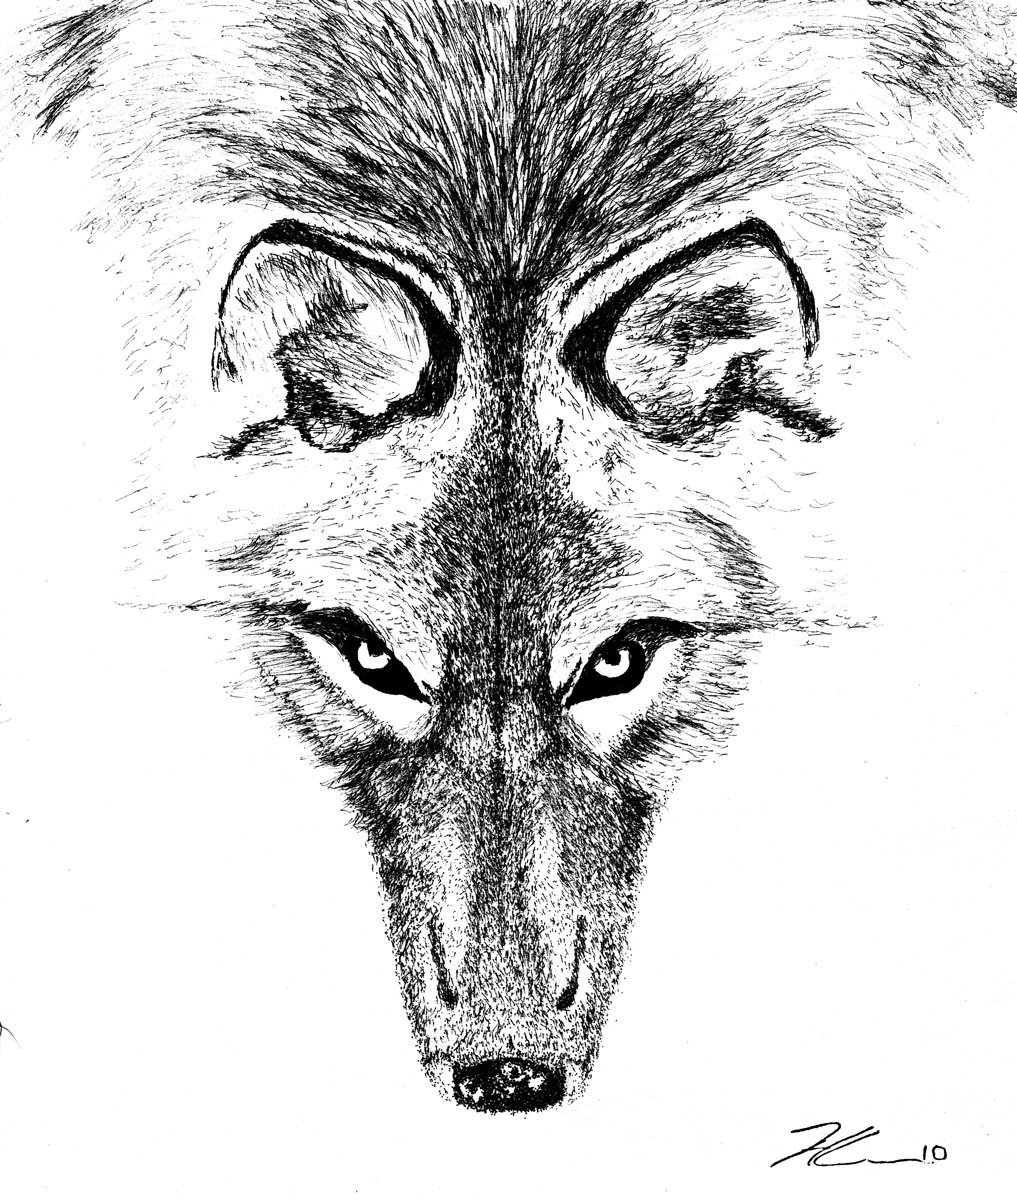 Photo of a drawing by Hassan Laramée of a wolf's head and shoulder. The drawing is done from an aerial perspective and the wolf appears to be looking up at the viewer.